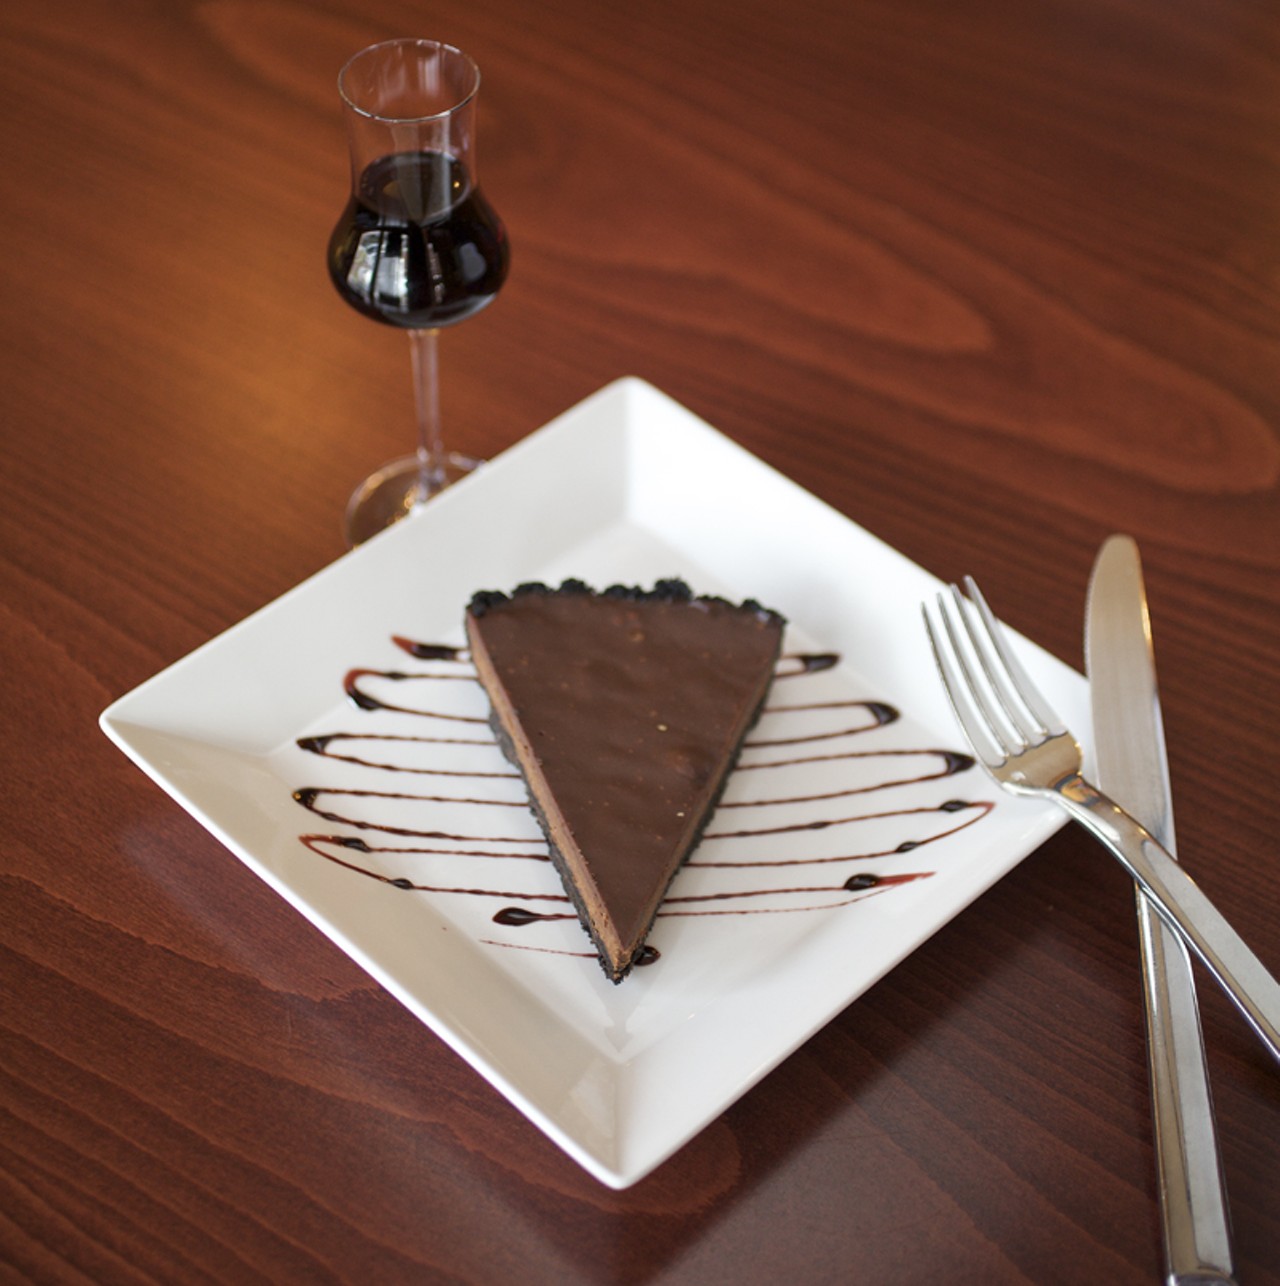 Chocolate Tart with a port reduction is shown here with a glass of Noval Black Port.